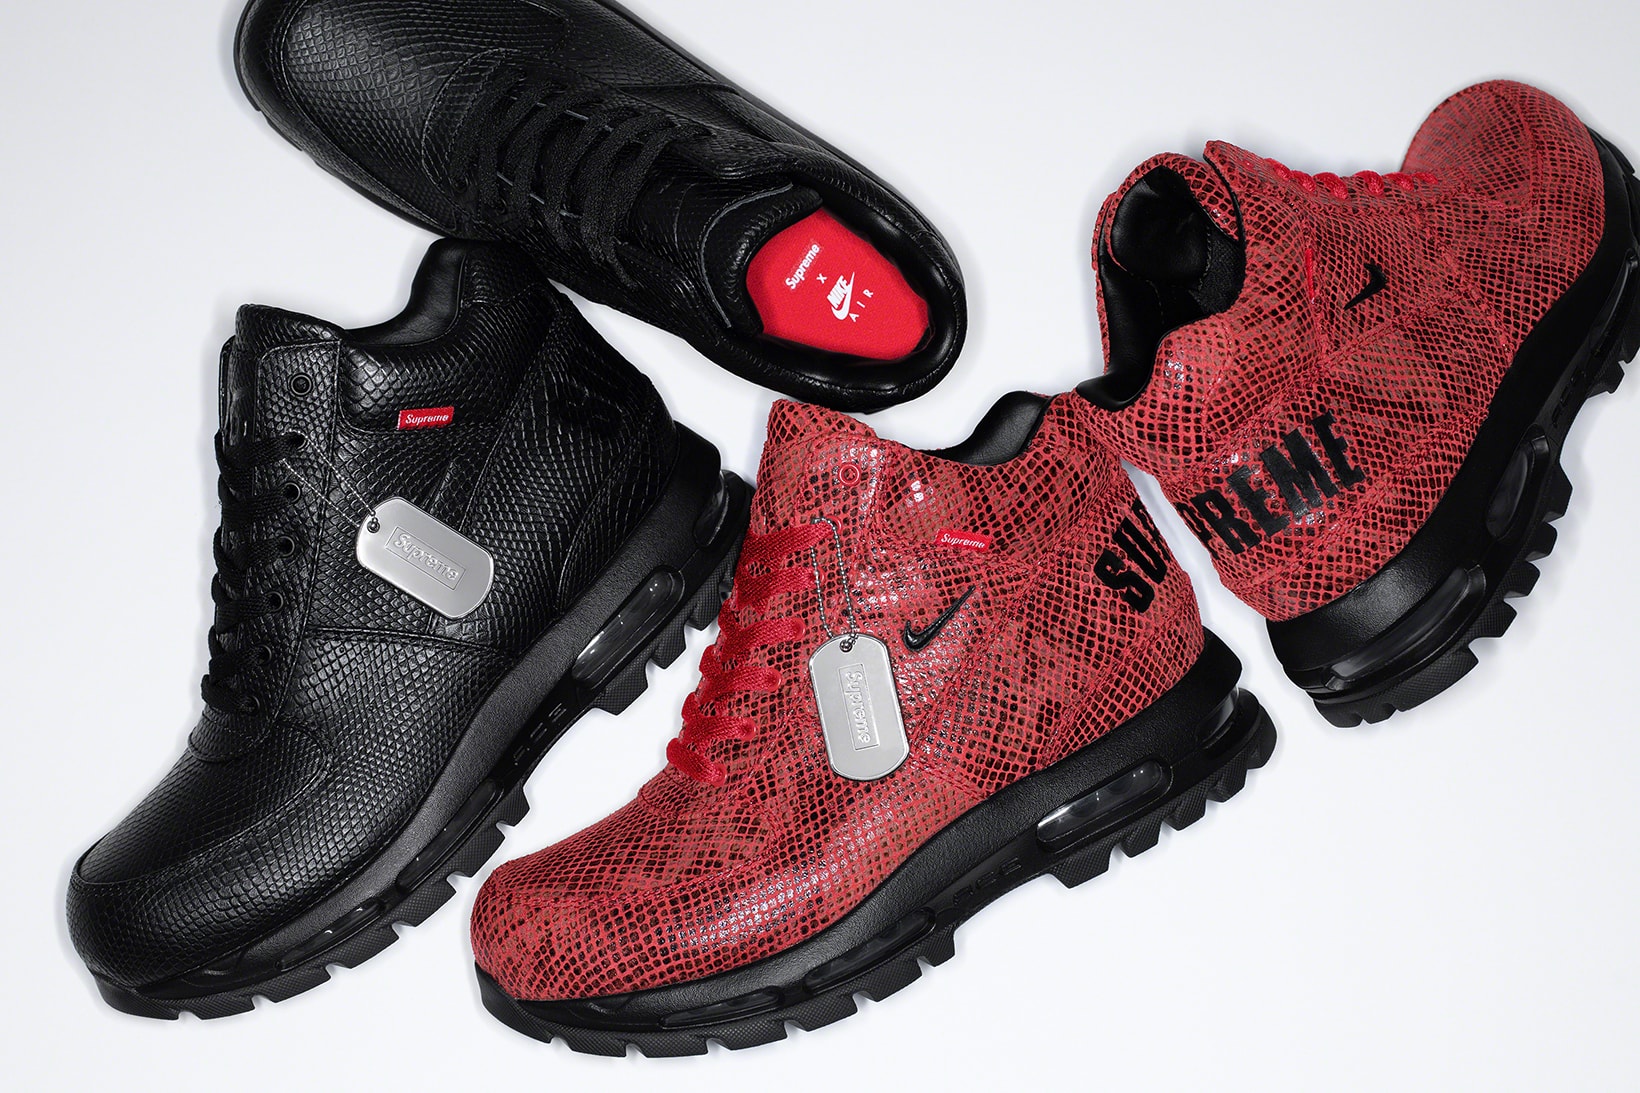 supreme nike goadome collaboration boots footwear shoes snakeskin red black colorway insole laces silver dog tag